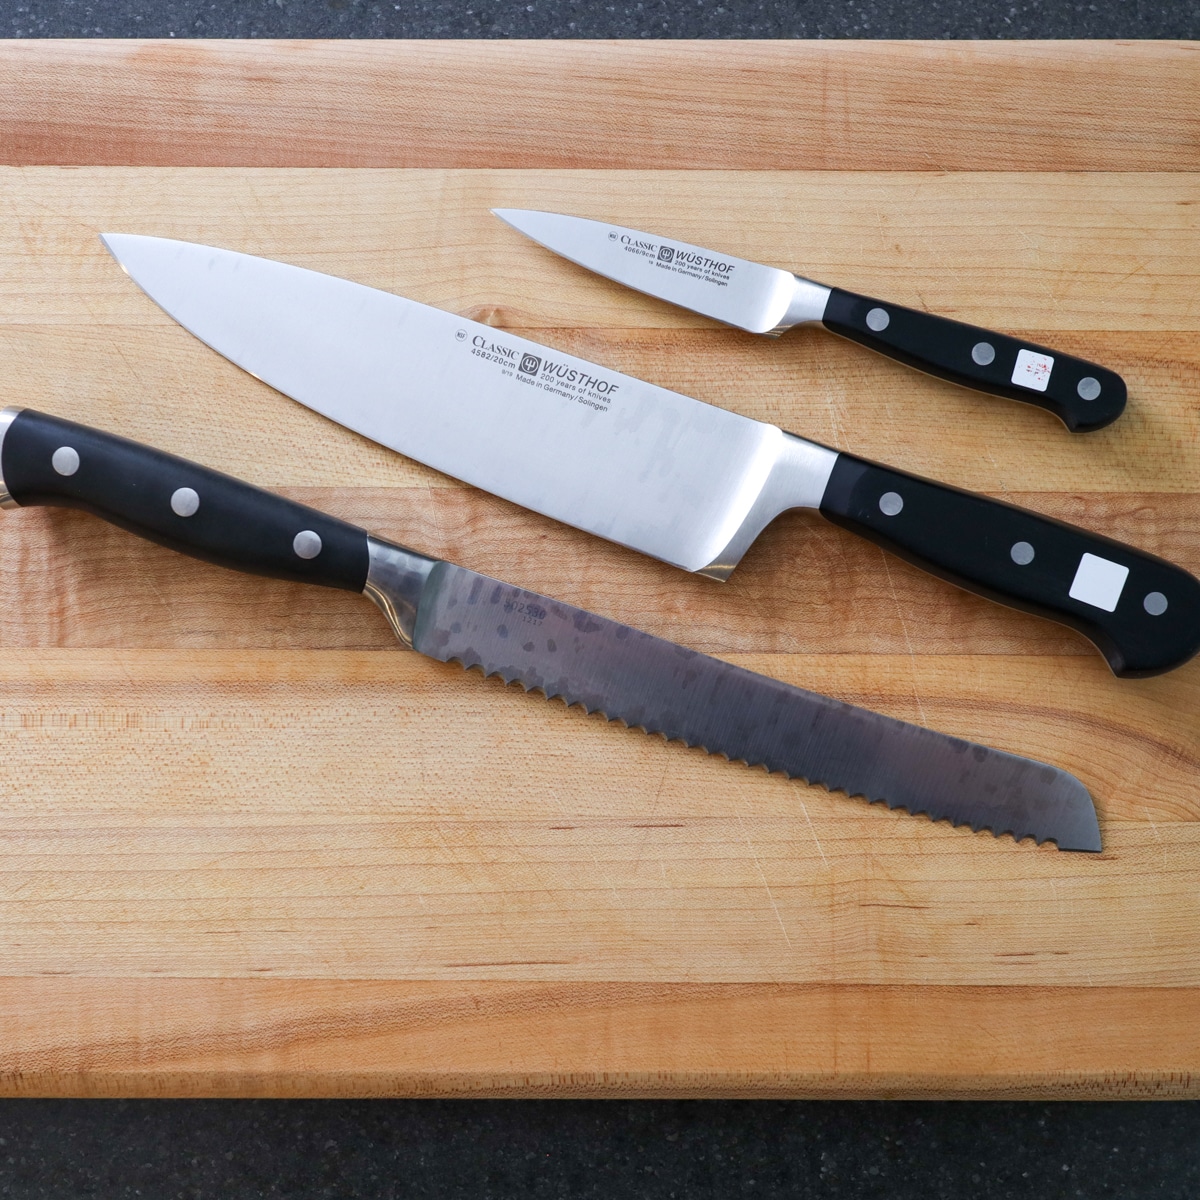 Top view of a parking knife, chef knife, and a bread knife on a cutting board